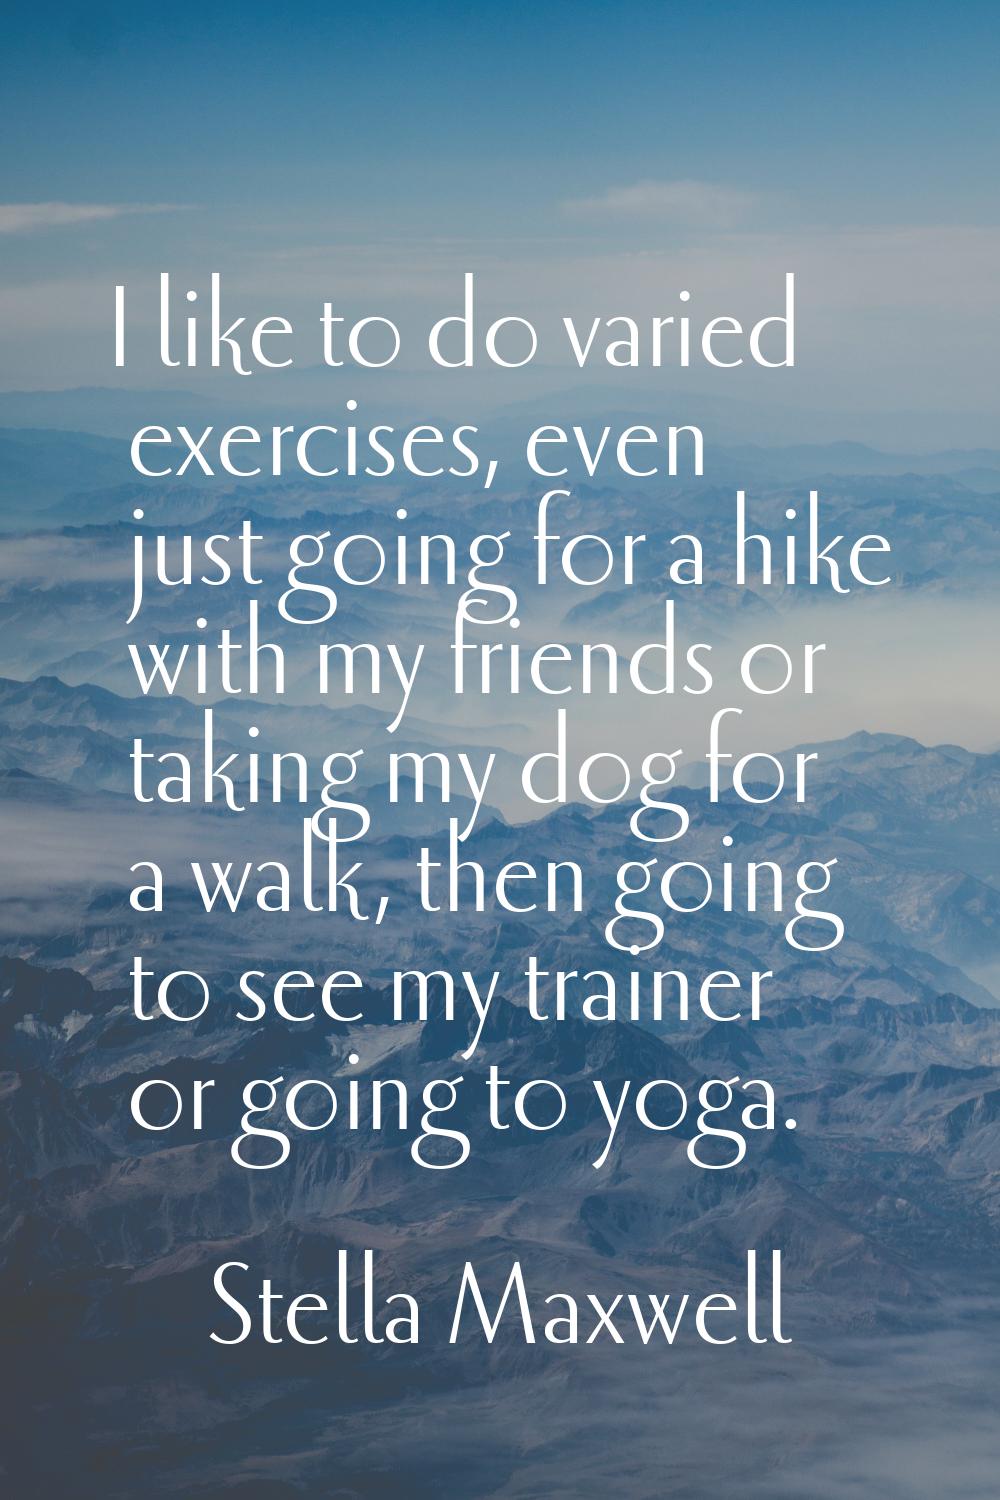 I like to do varied exercises, even just going for a hike with my friends or taking my dog for a wa